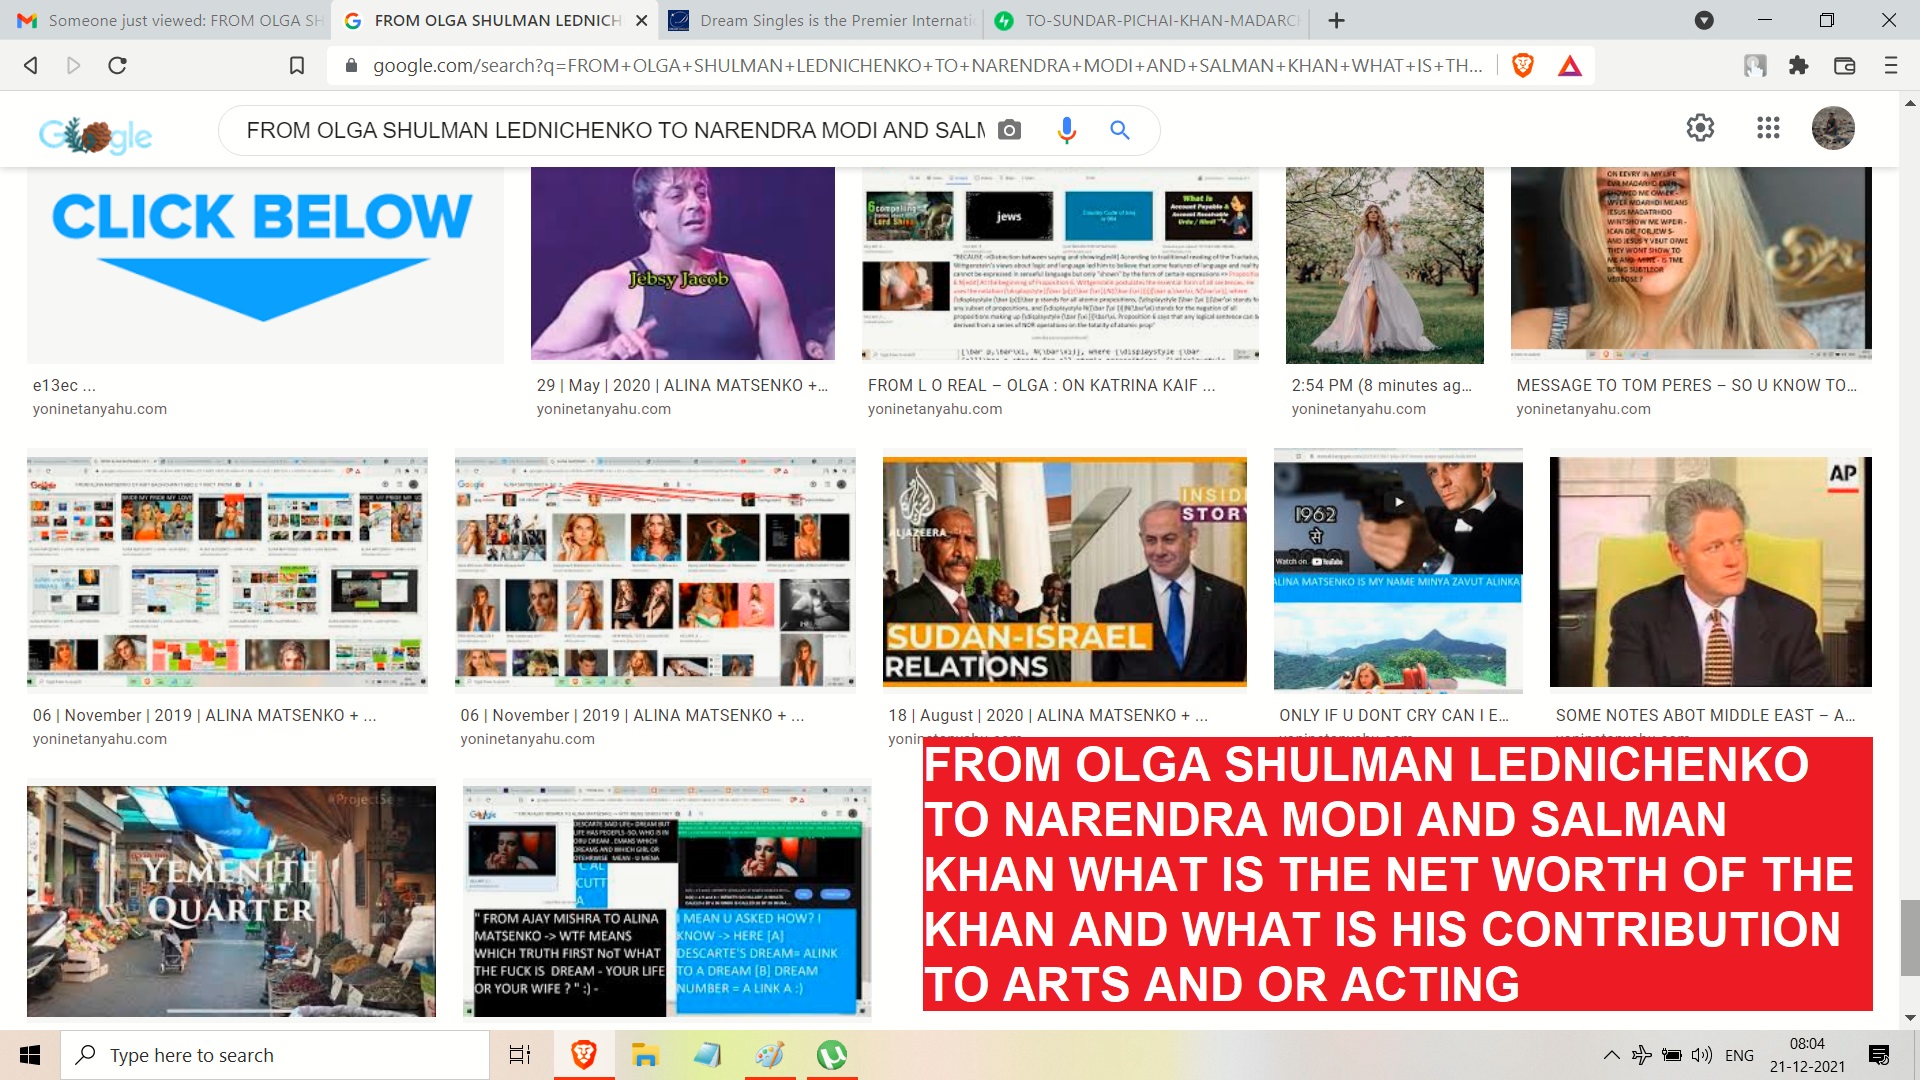 FROM OLGA SHULMAN LEDNICHENKO TO NARENDRA MODI AND SALMAN KHAN WHAT IS THE NET WORTH OF THE KHAN AND WHAT IS HIS CONTRIBUTION TO ARTS AND OR ACTING..